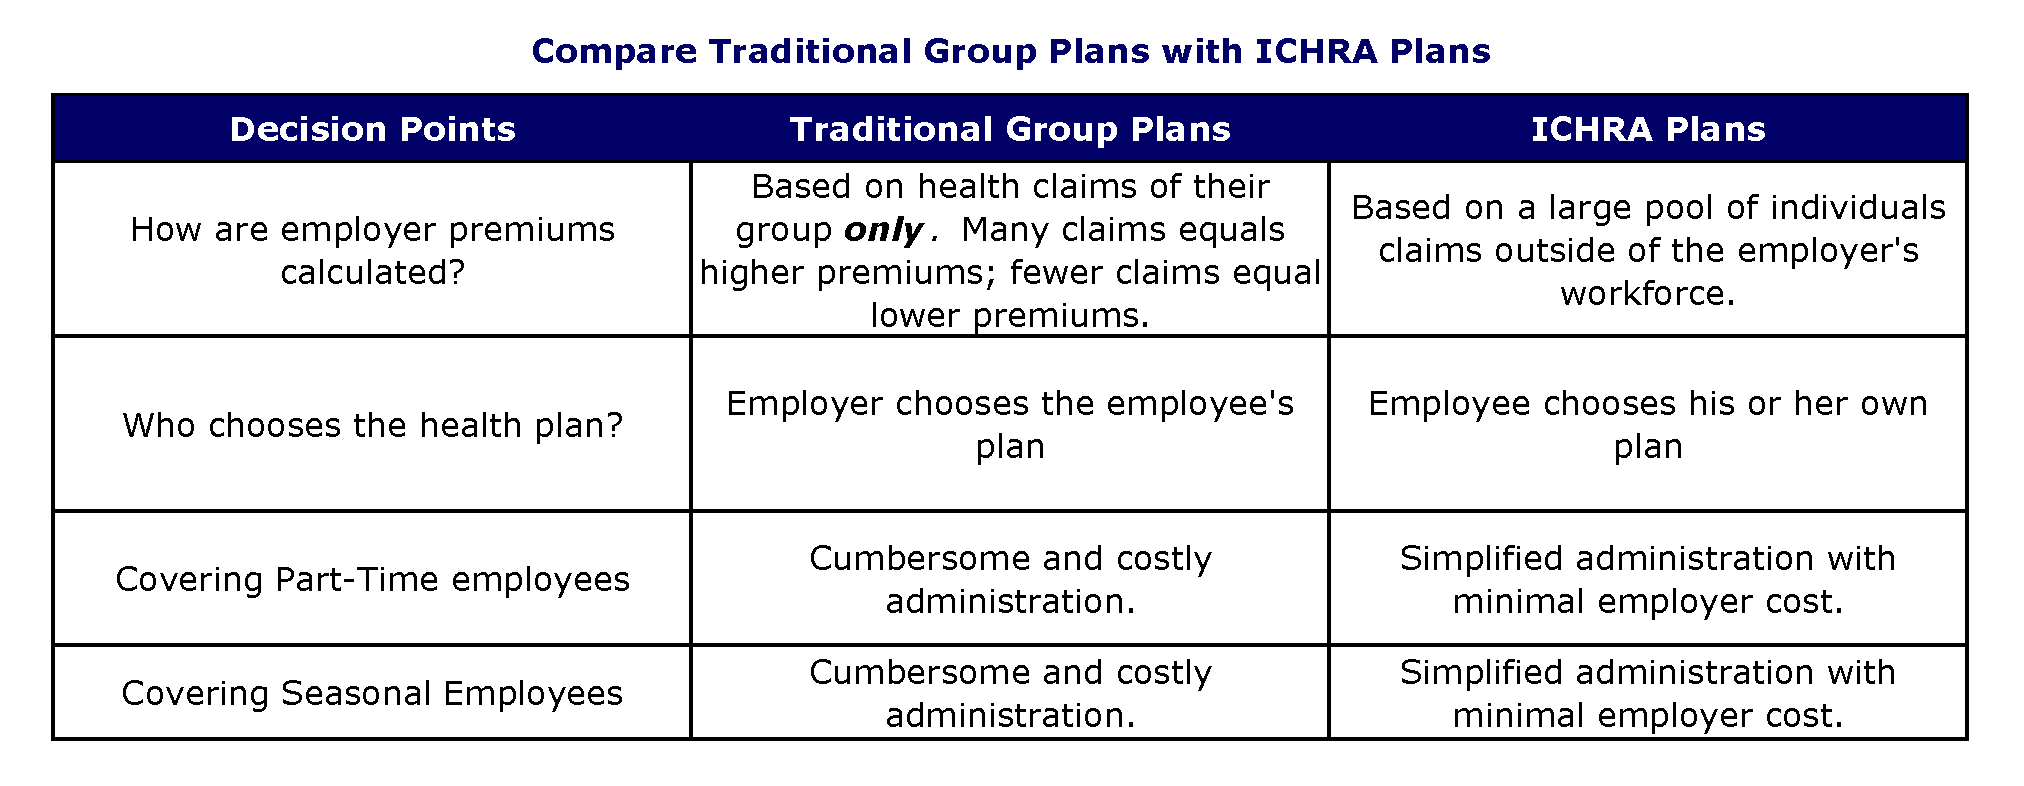 Decision points for ICHRA plans